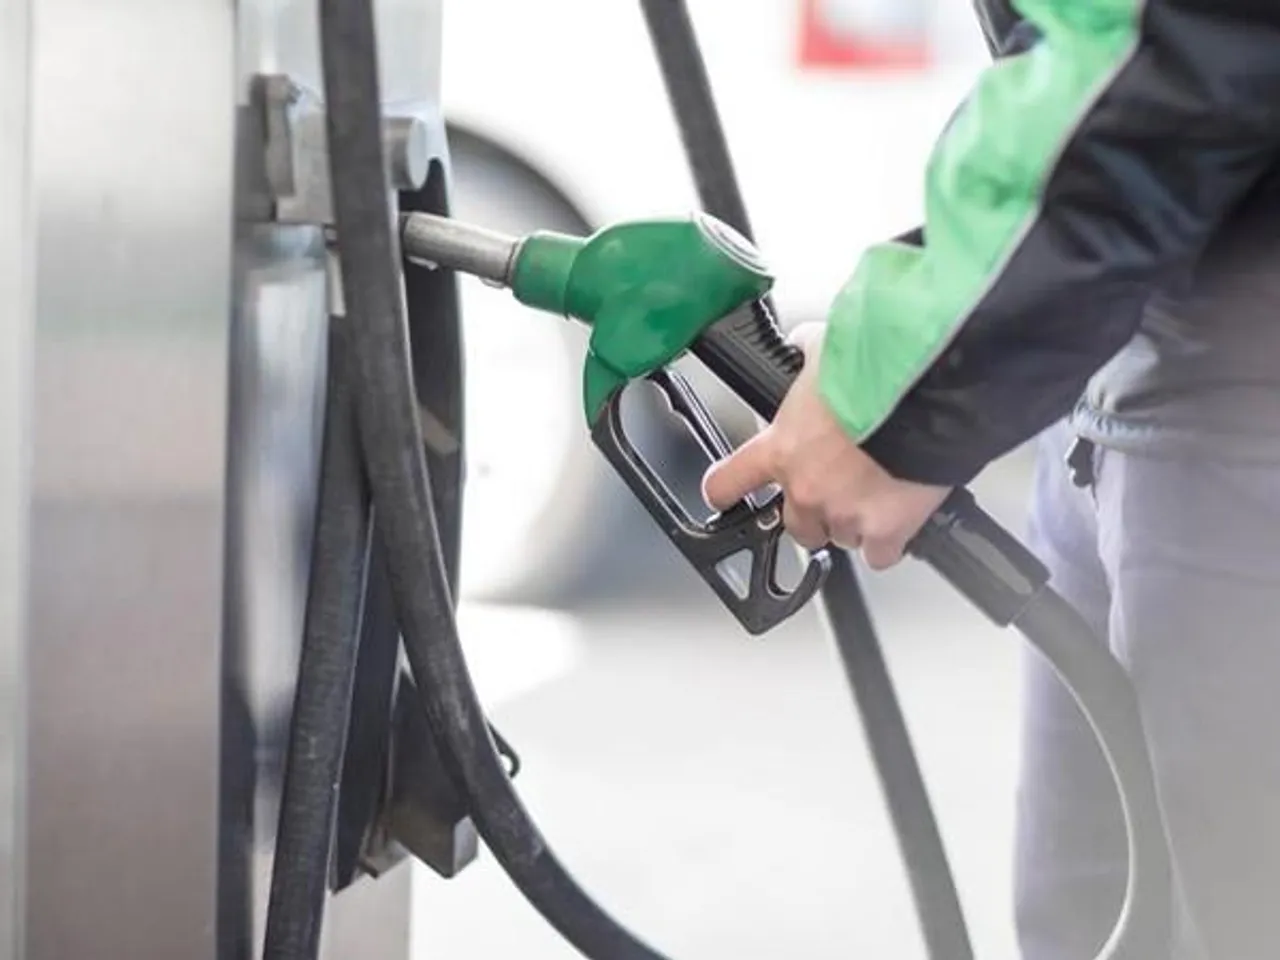 Petrol prices are set to rise again